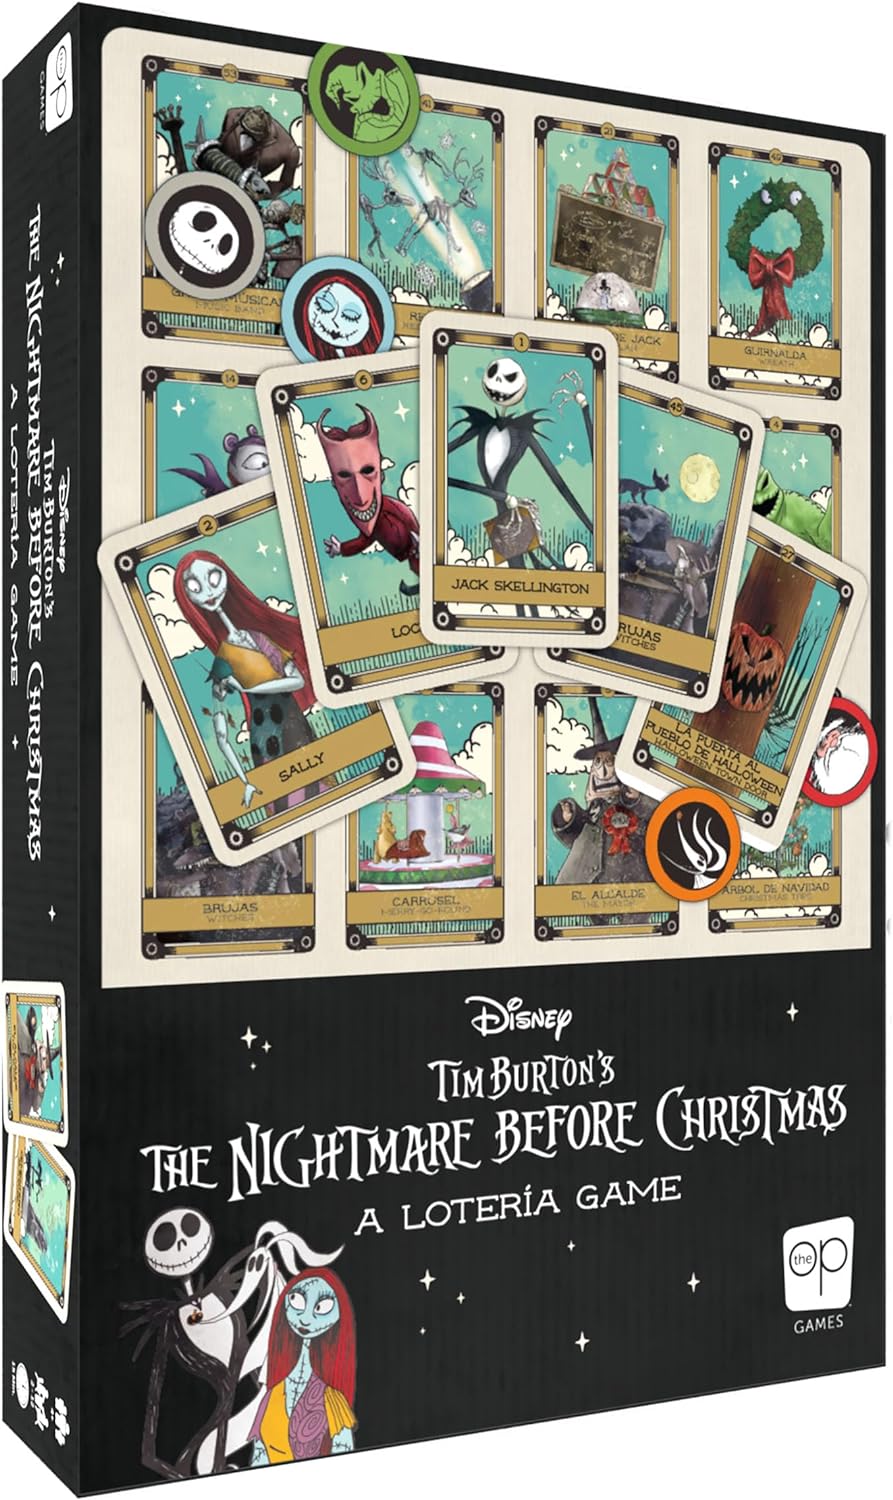 Lotería: Disney Tim Burton’s The Nightmare Before Christmas | Traditional Loteria Mexicana Game | Bingo Style, Featuring Custom Artwork  Illustrations | Inspired by Spanish Words  Mexican Culture